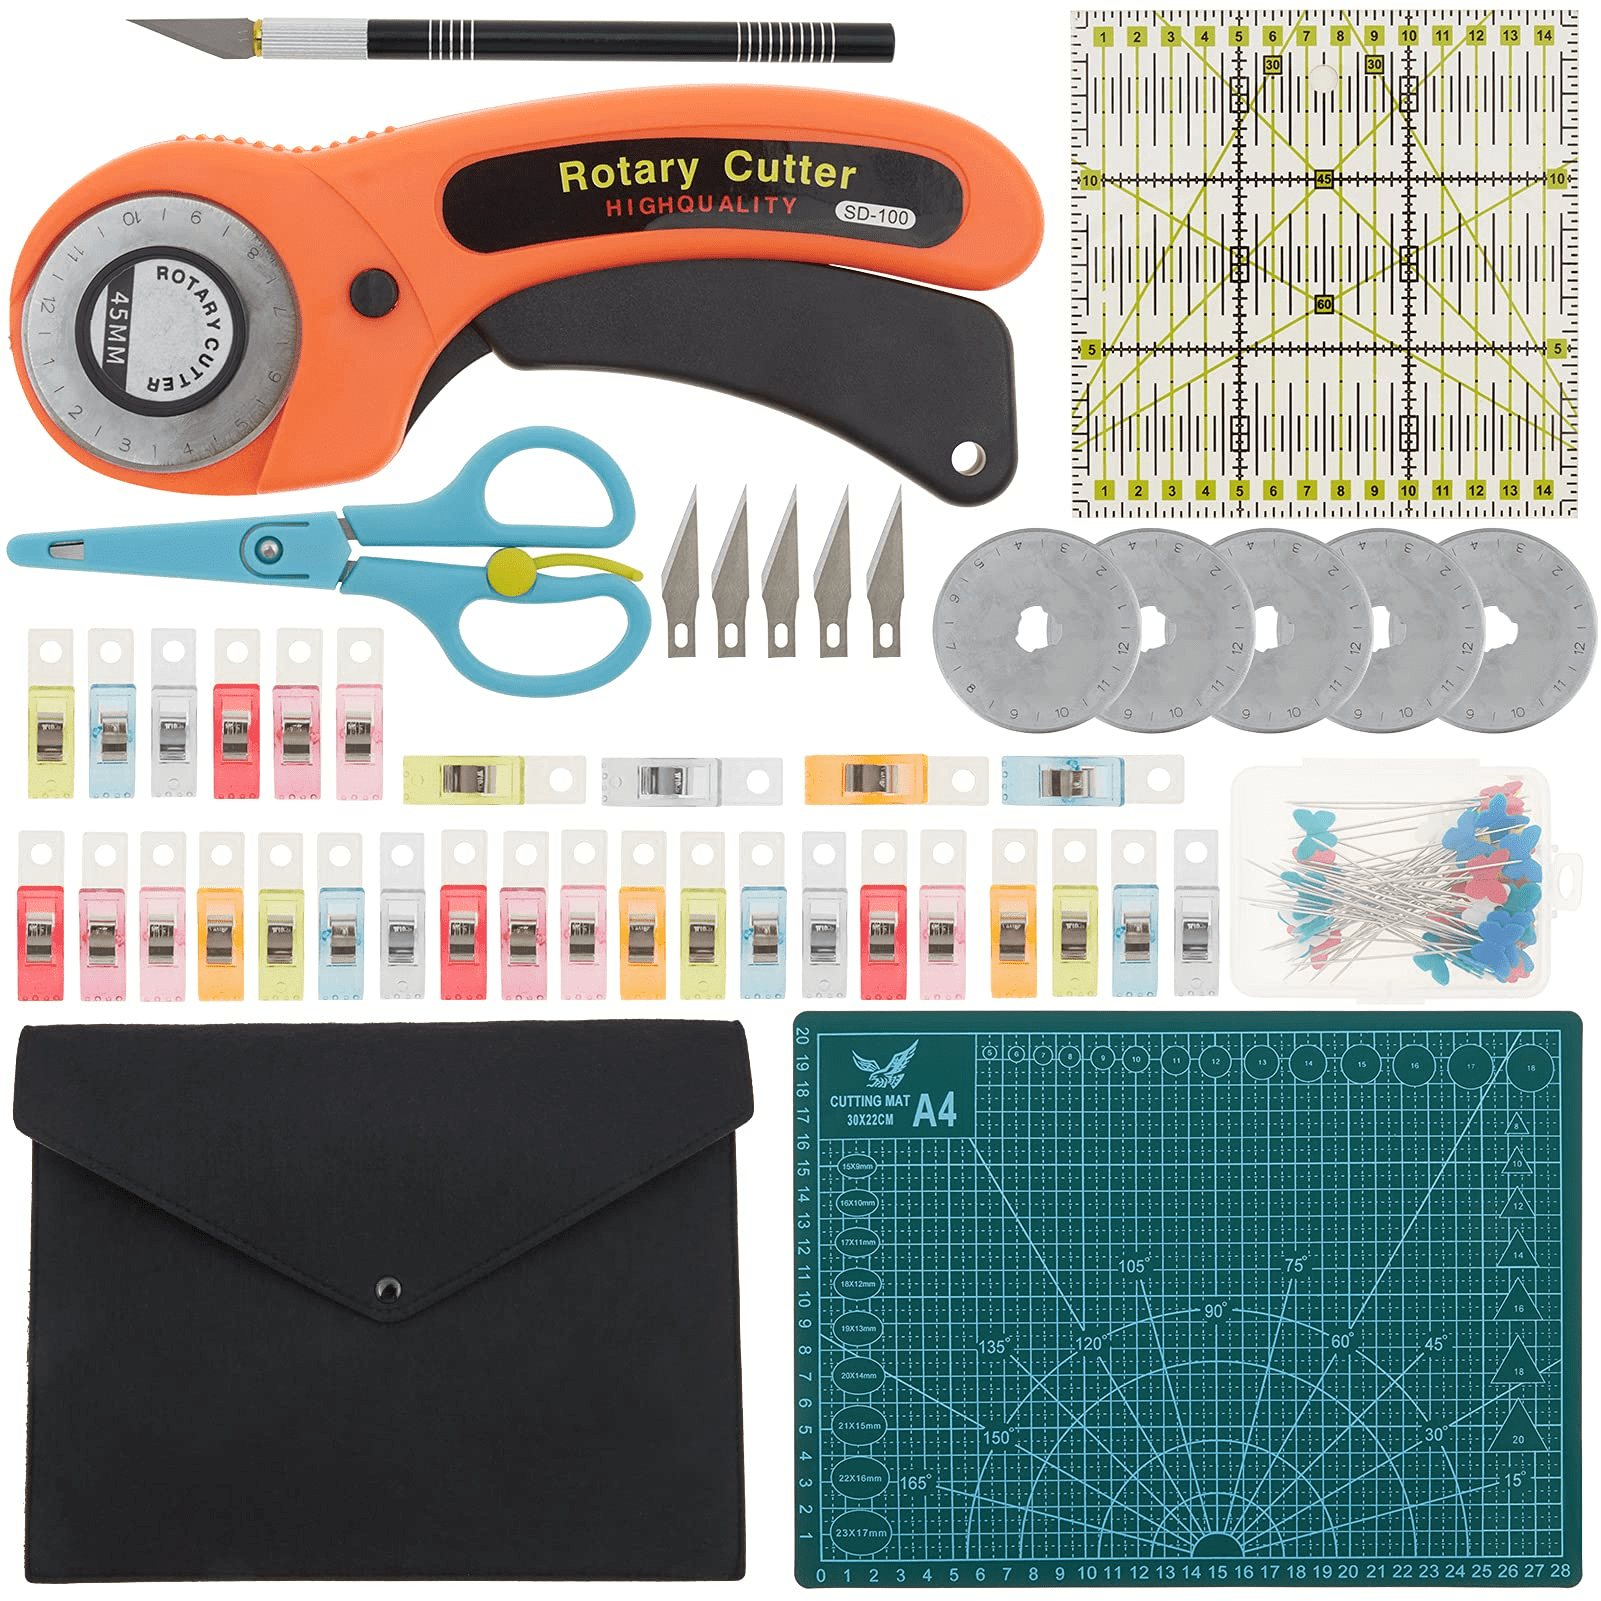  DIYSELF 125 Pcs Exacto Knife Craft Knife, Exacto Knife Set with  110 Pcs Exacto Blades and 10 Pcs Utility Blades, Precision Knife for  Cutting, Scrapbooking, Stencil, Fondant, Leather, Hobby Knife 